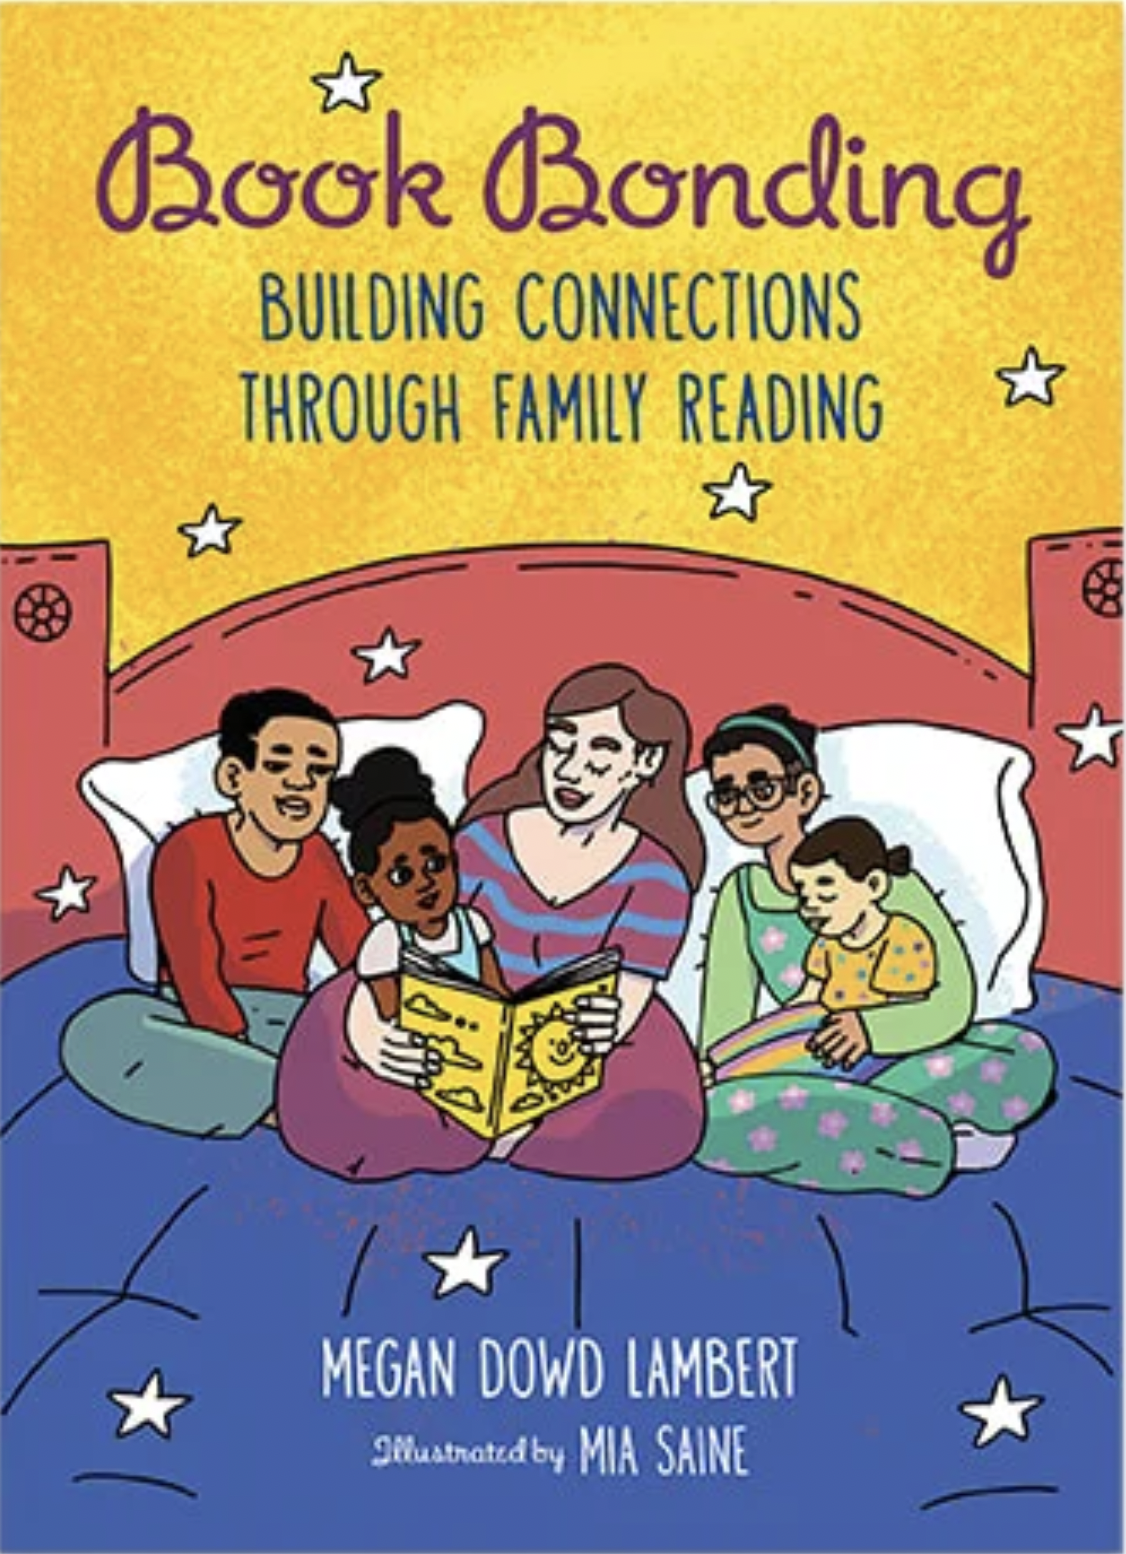 Bonds and Books: An Interview with Megan Dowd Lambert About Building Connections Through Family Reading